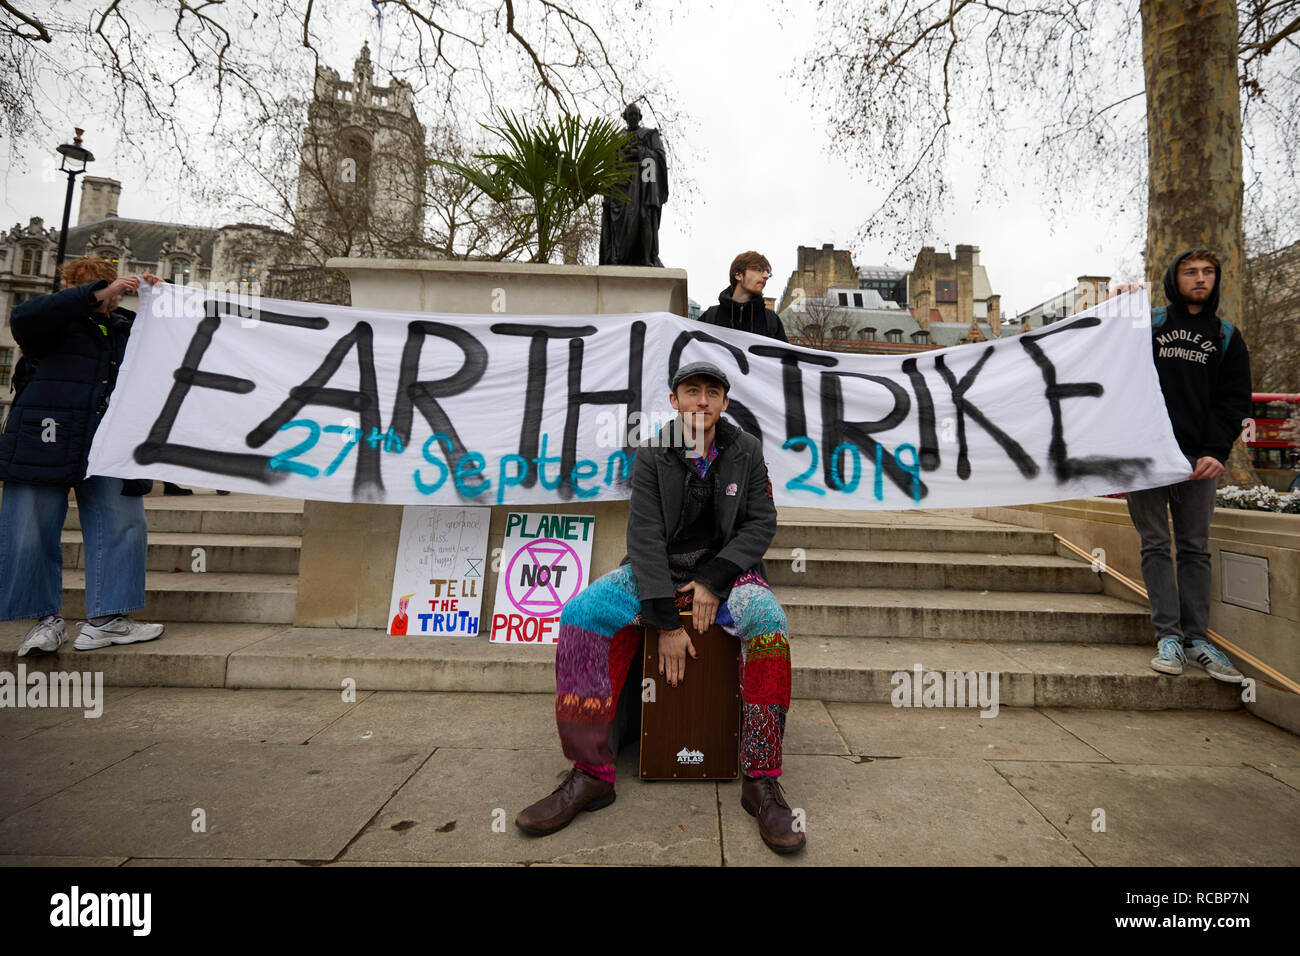 London, UK. - 15 Jan 2019: Supporters of Earth Strike, a grassroots enviromental activisit movement, who demonstrated in Parliament to campaign for a General Stike day on 27 September. Credit: Kevin J. Frost/Alamy Live News Stock Photo